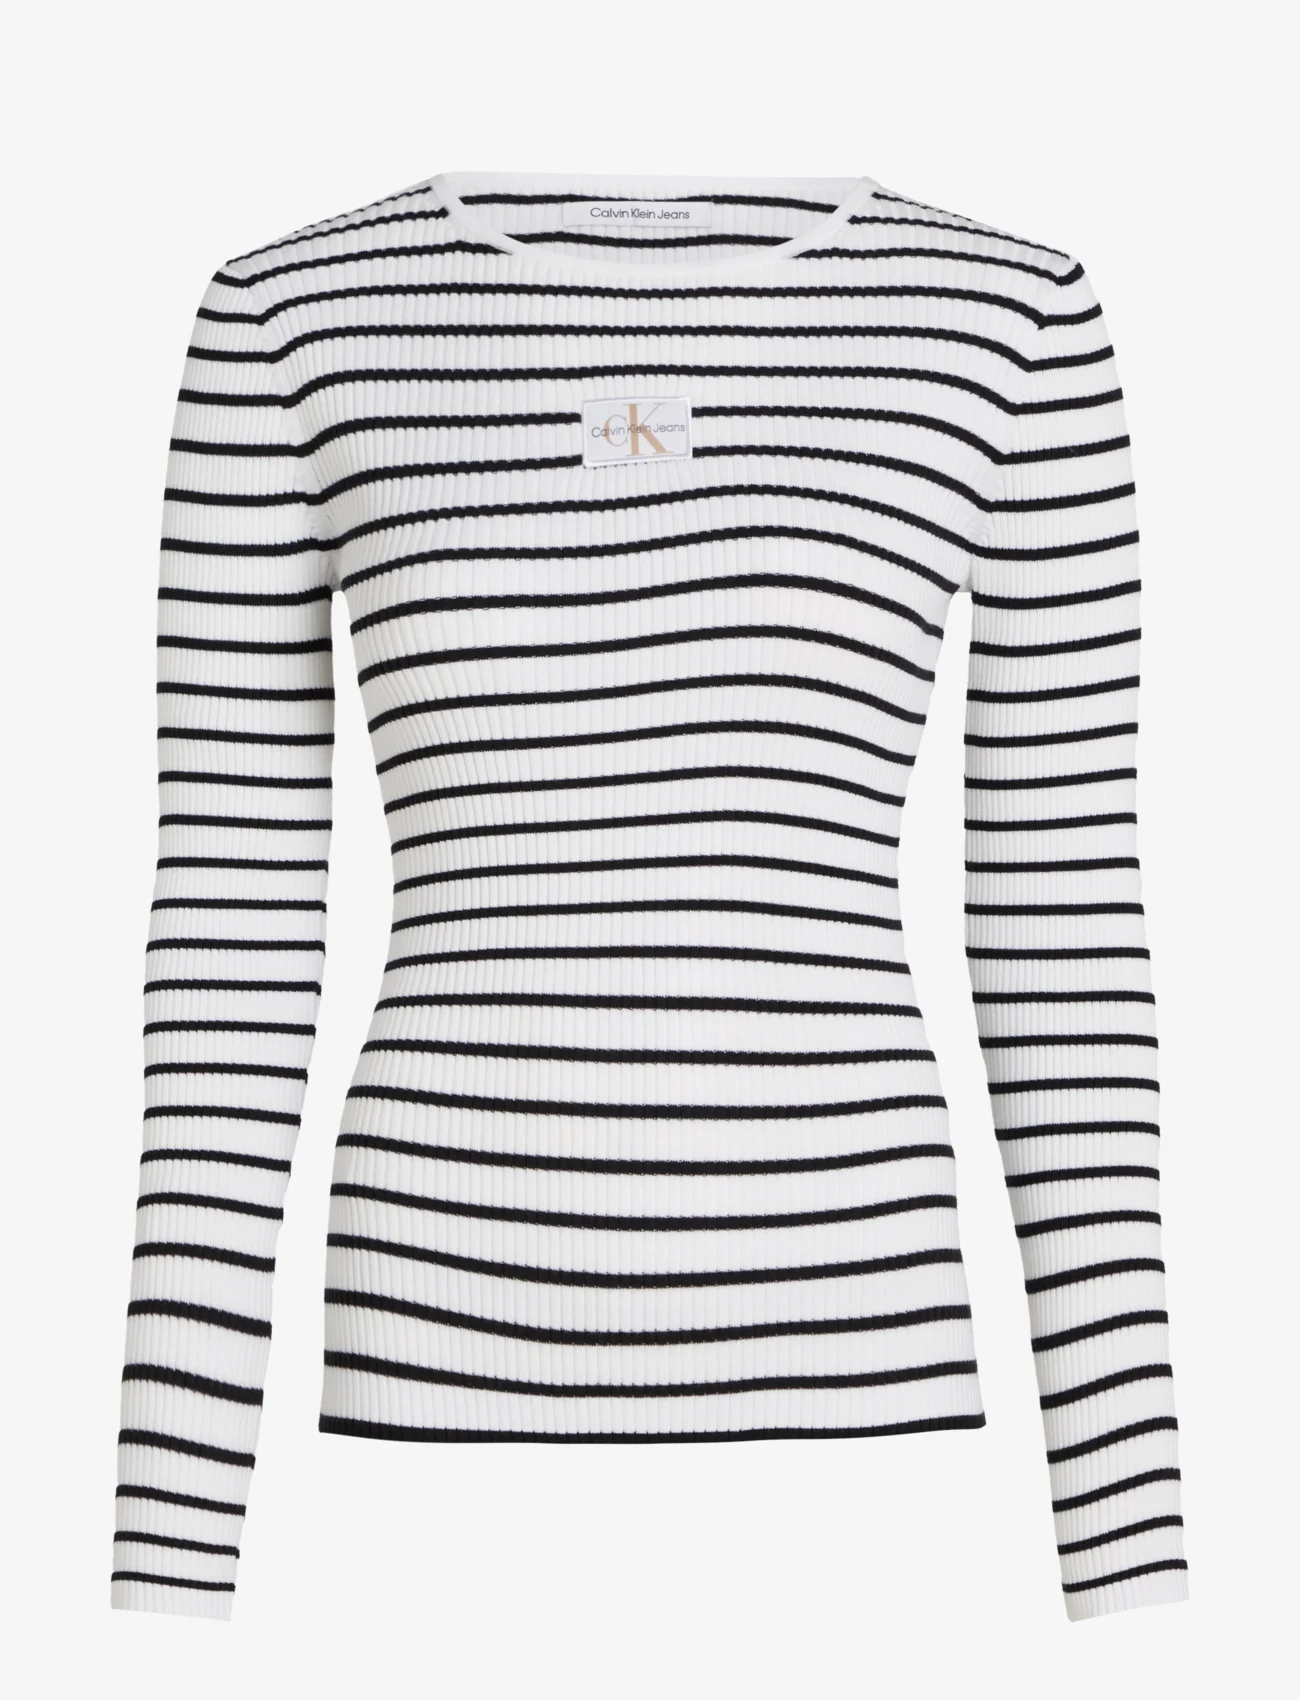 Calvin Klein Jeans - WOVEN LABEL TIGHT SWEATER - long-sleeved tops - ck black / bright white striped - 0